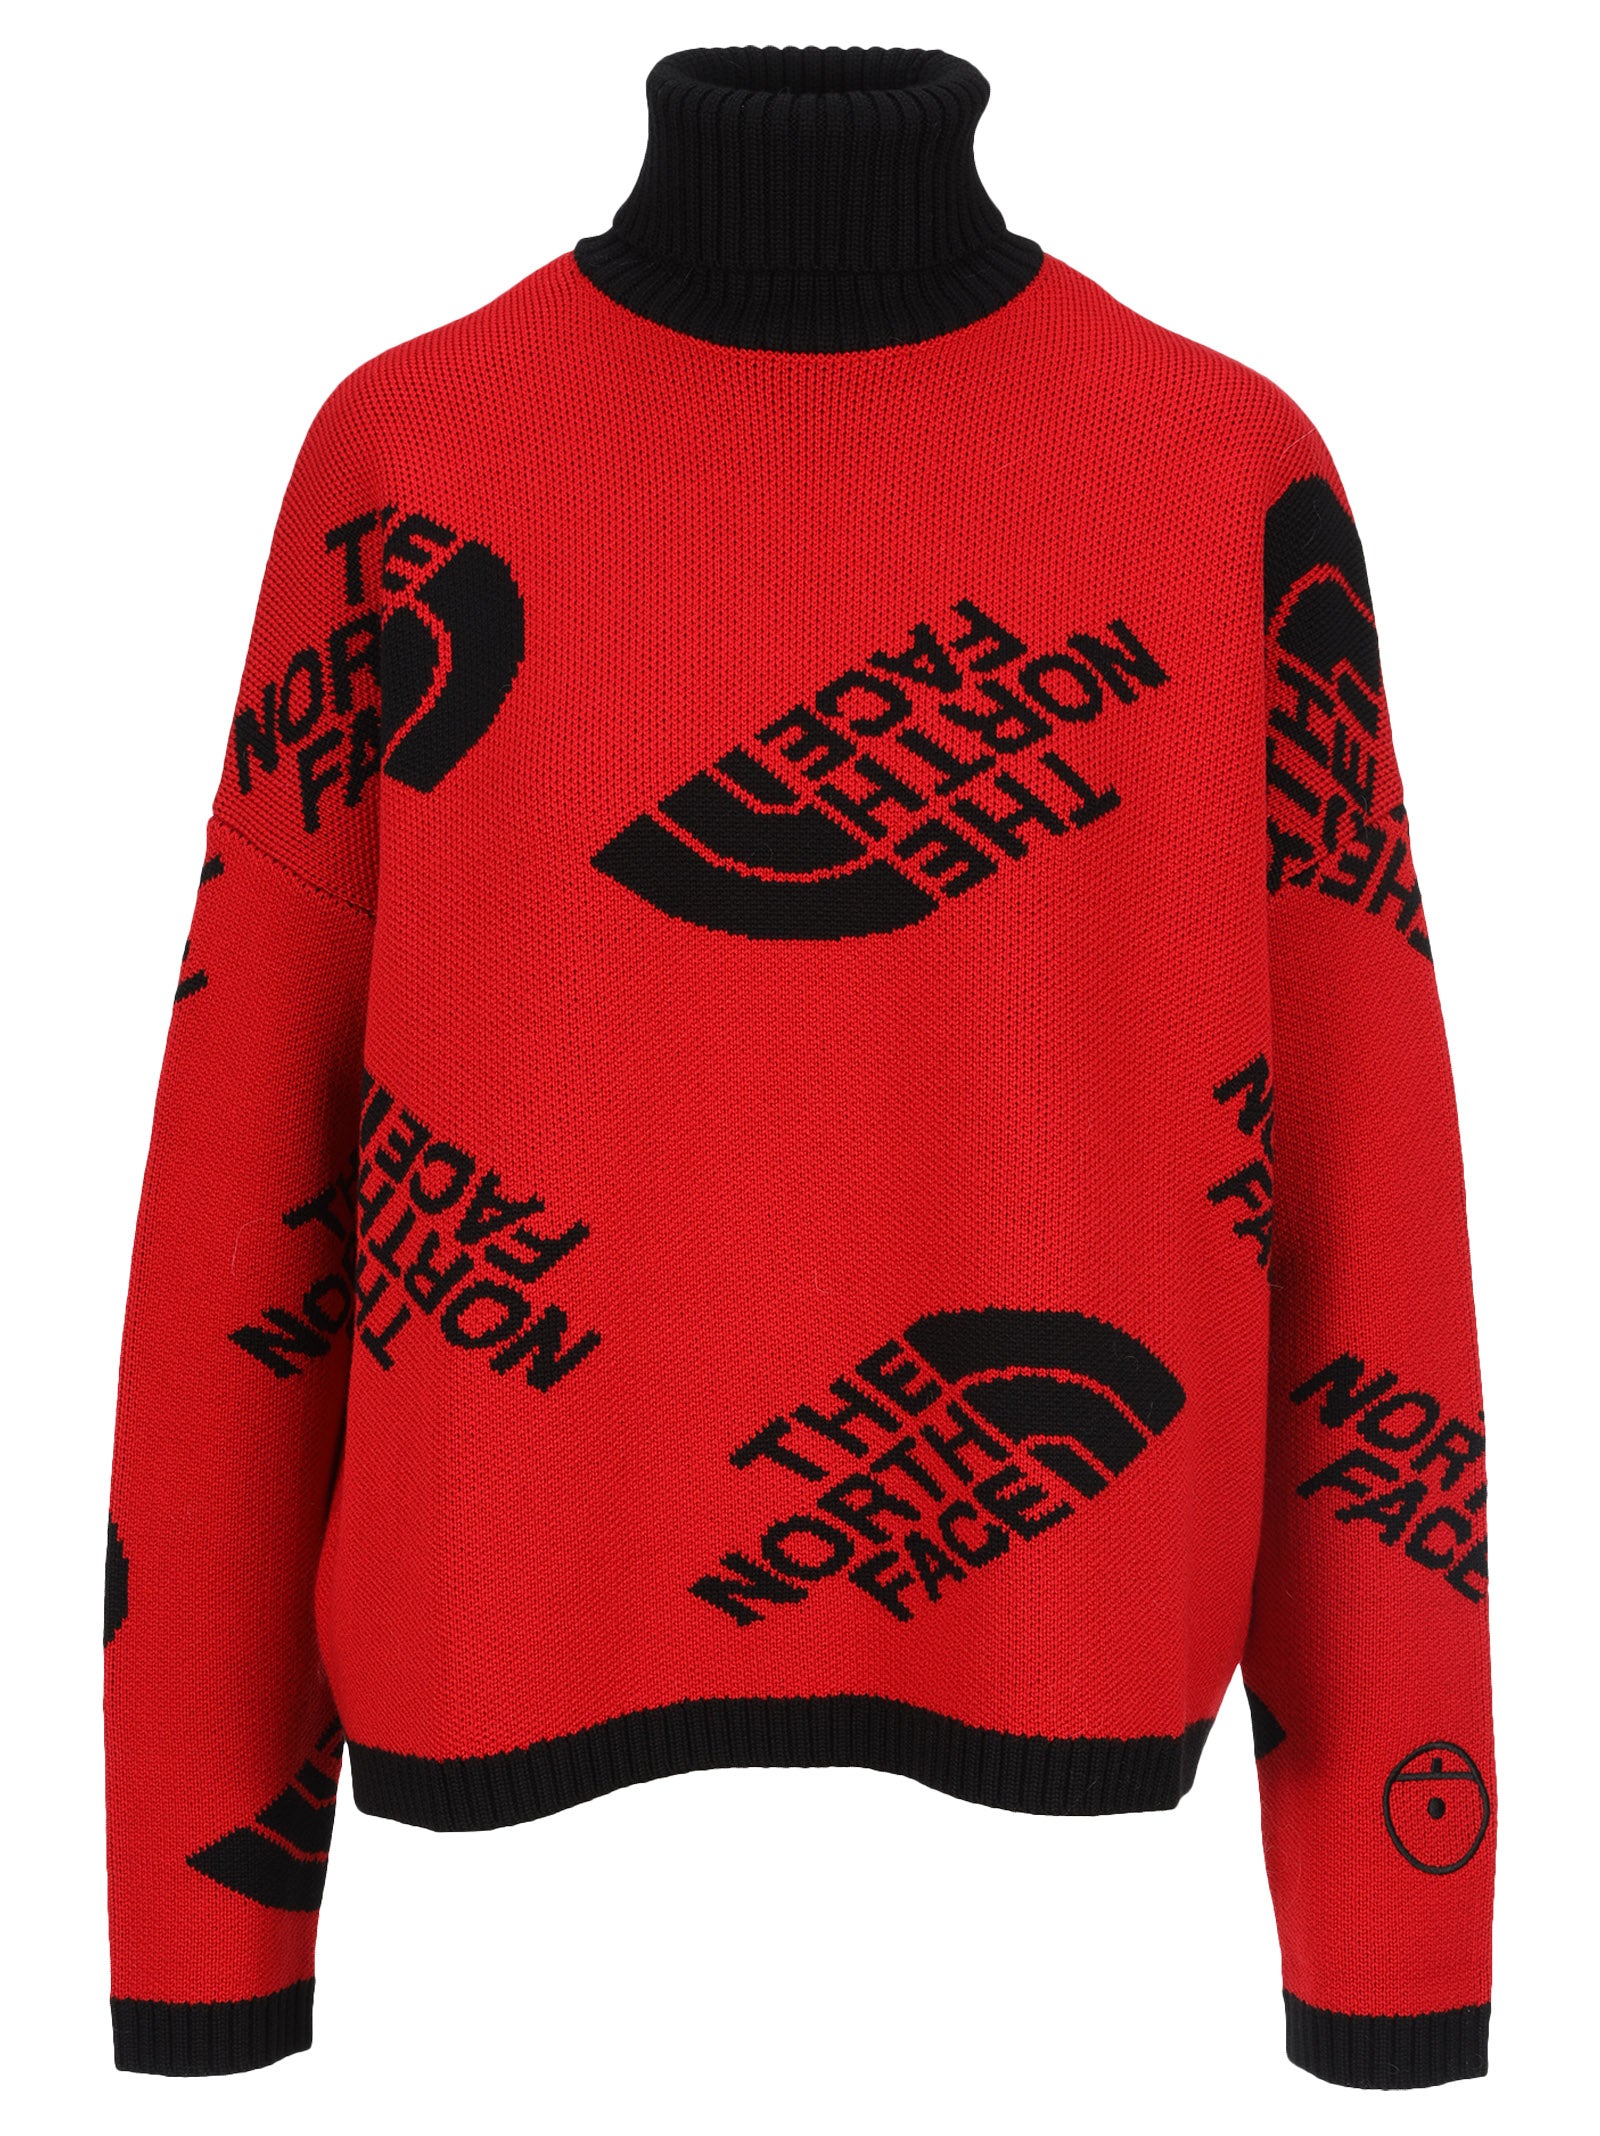 north face black sweater